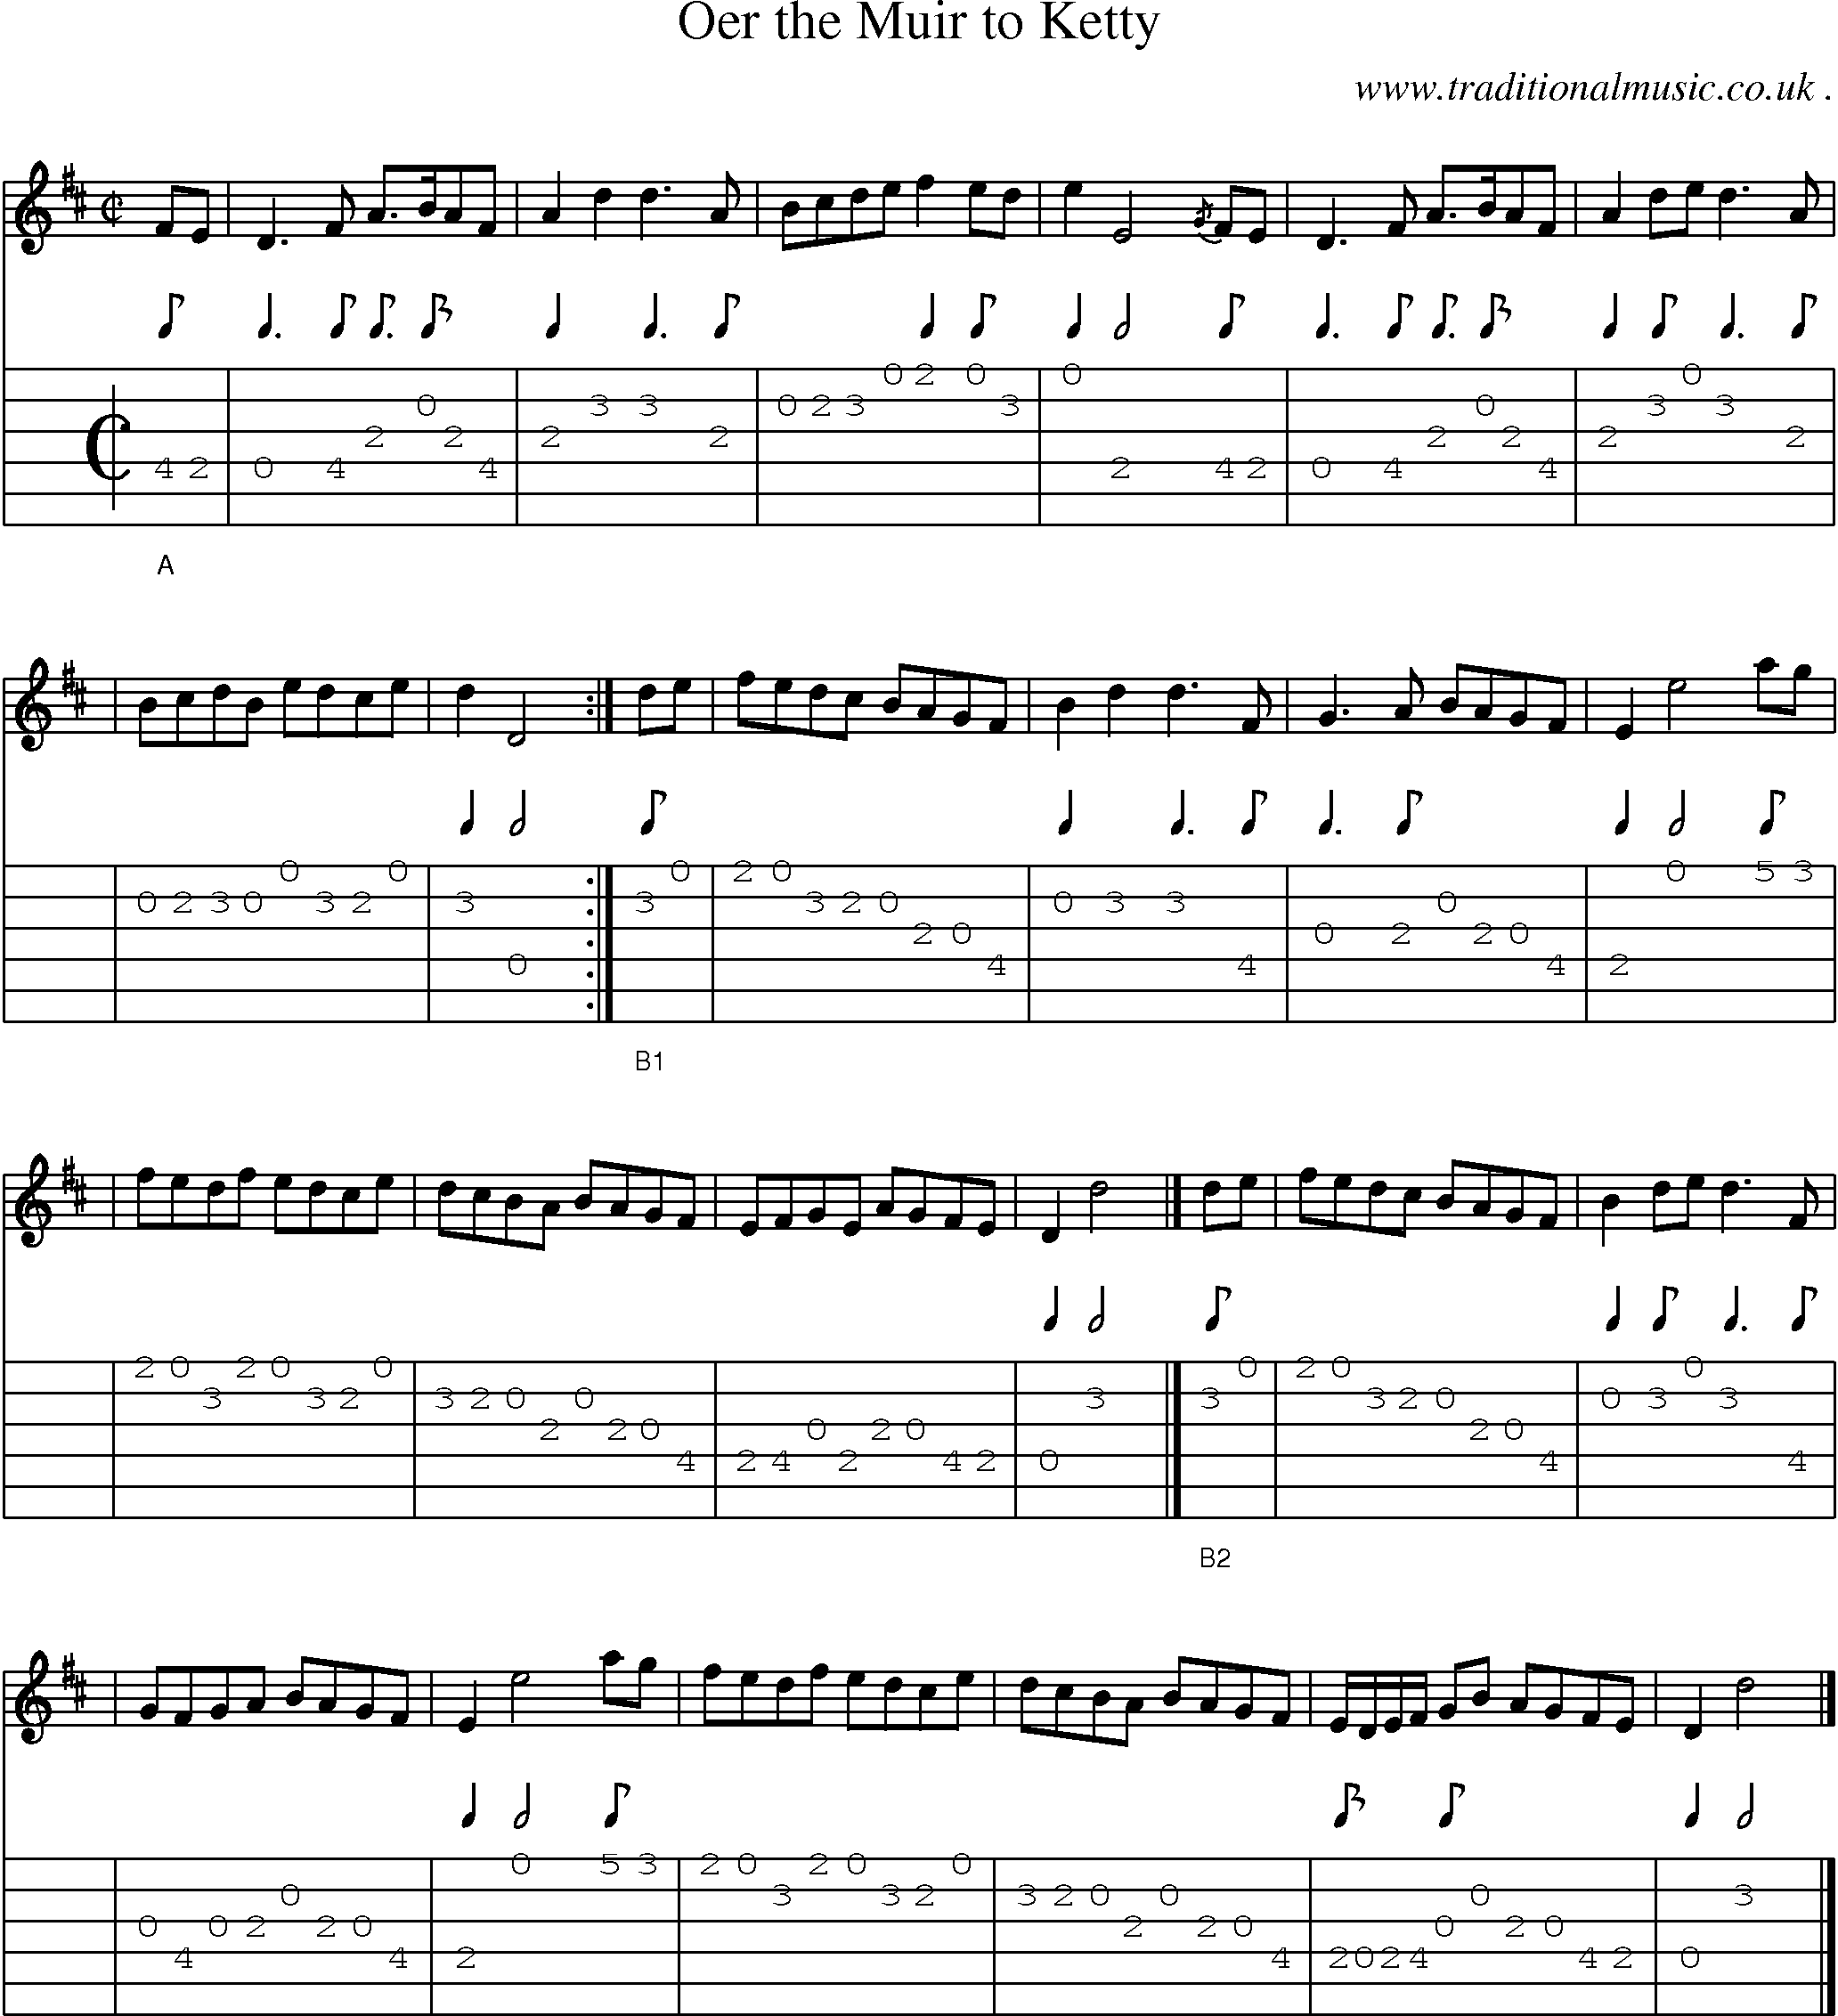 Sheet-music  score, Chords and Guitar Tabs for Oer The Muir To Ketty